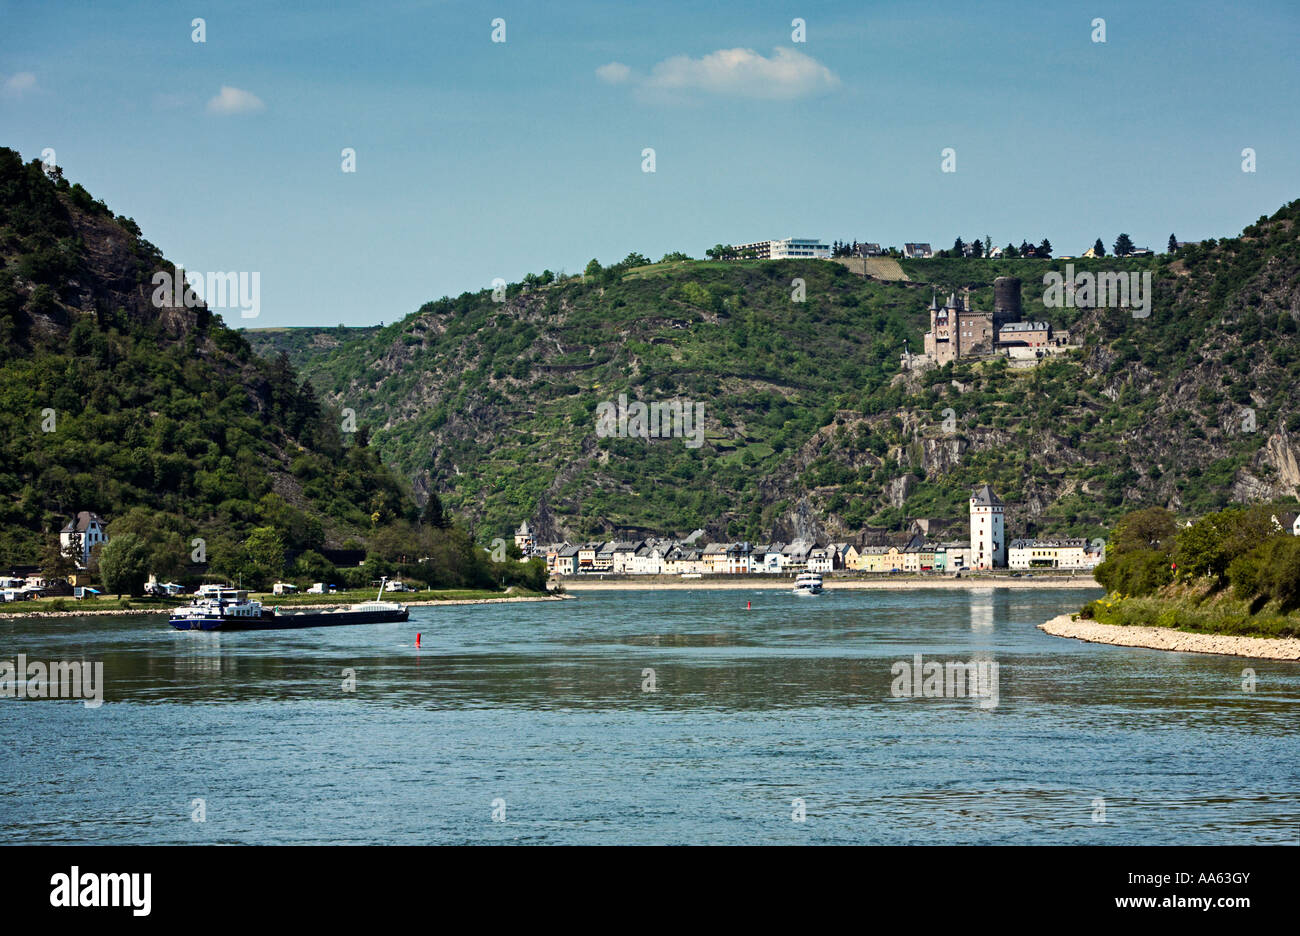 Castle Katz and St Goarshausen in the river Rhine Valley Rhineland Germany Europe Stock Photo